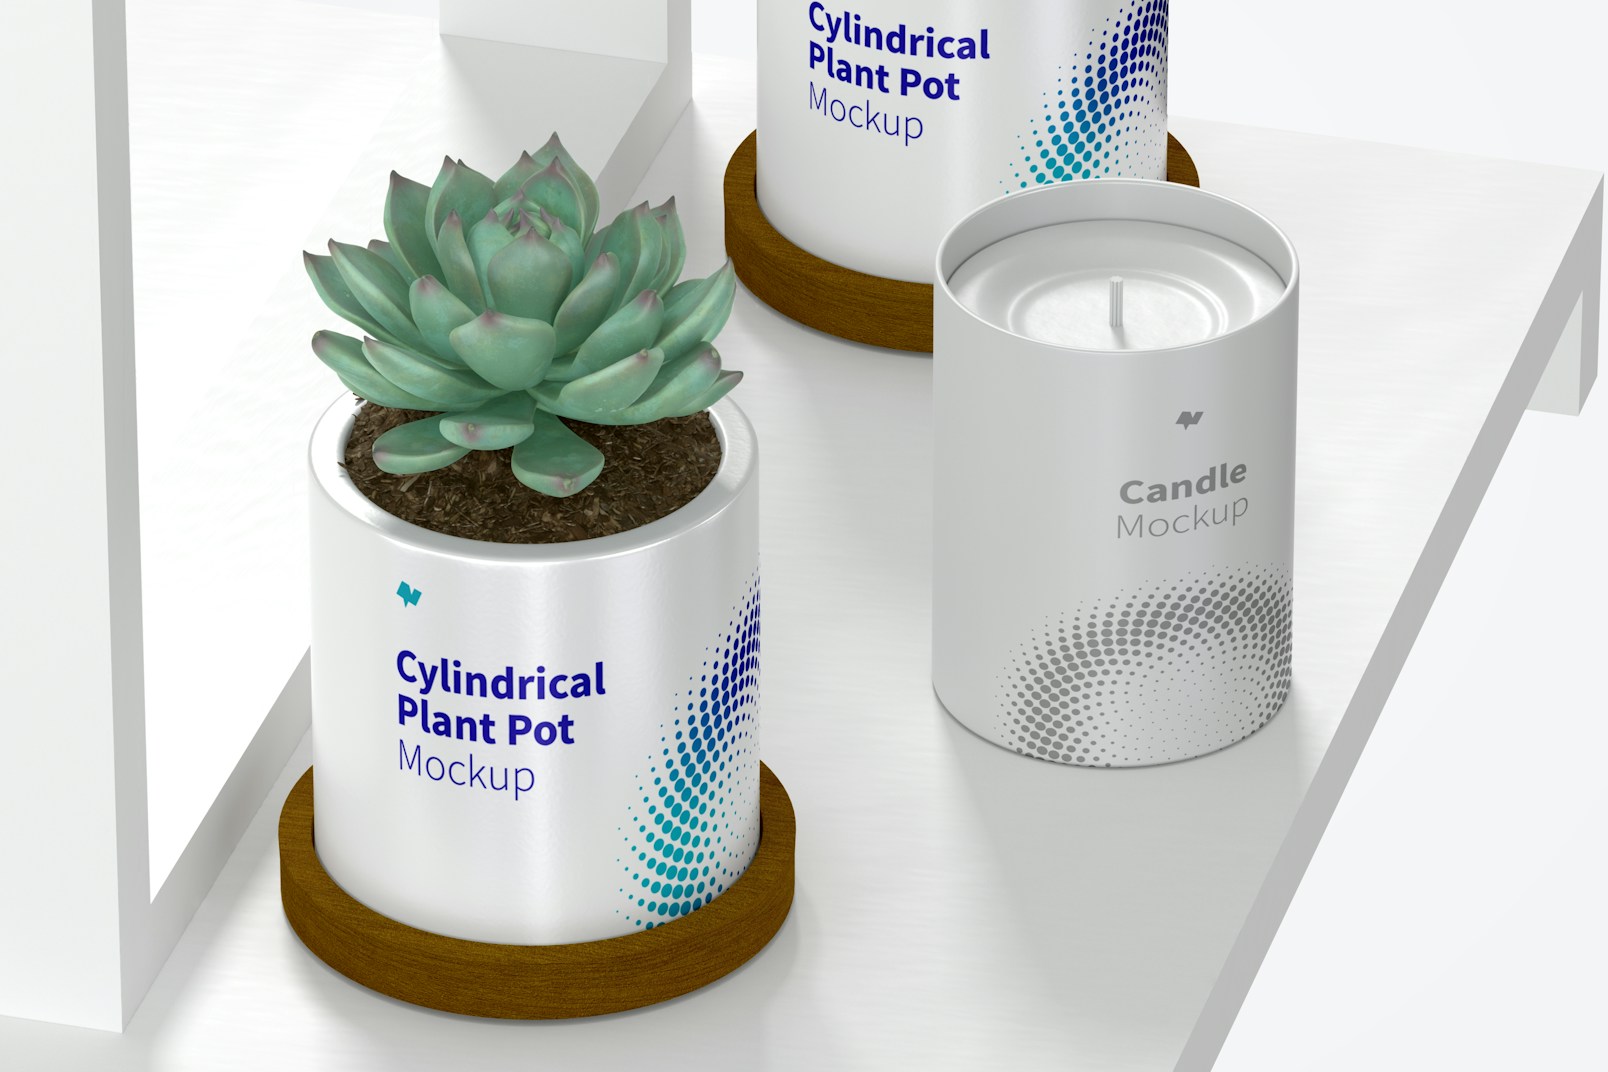 Ceramic Cylindrical Plant Pot and Candle Mockup